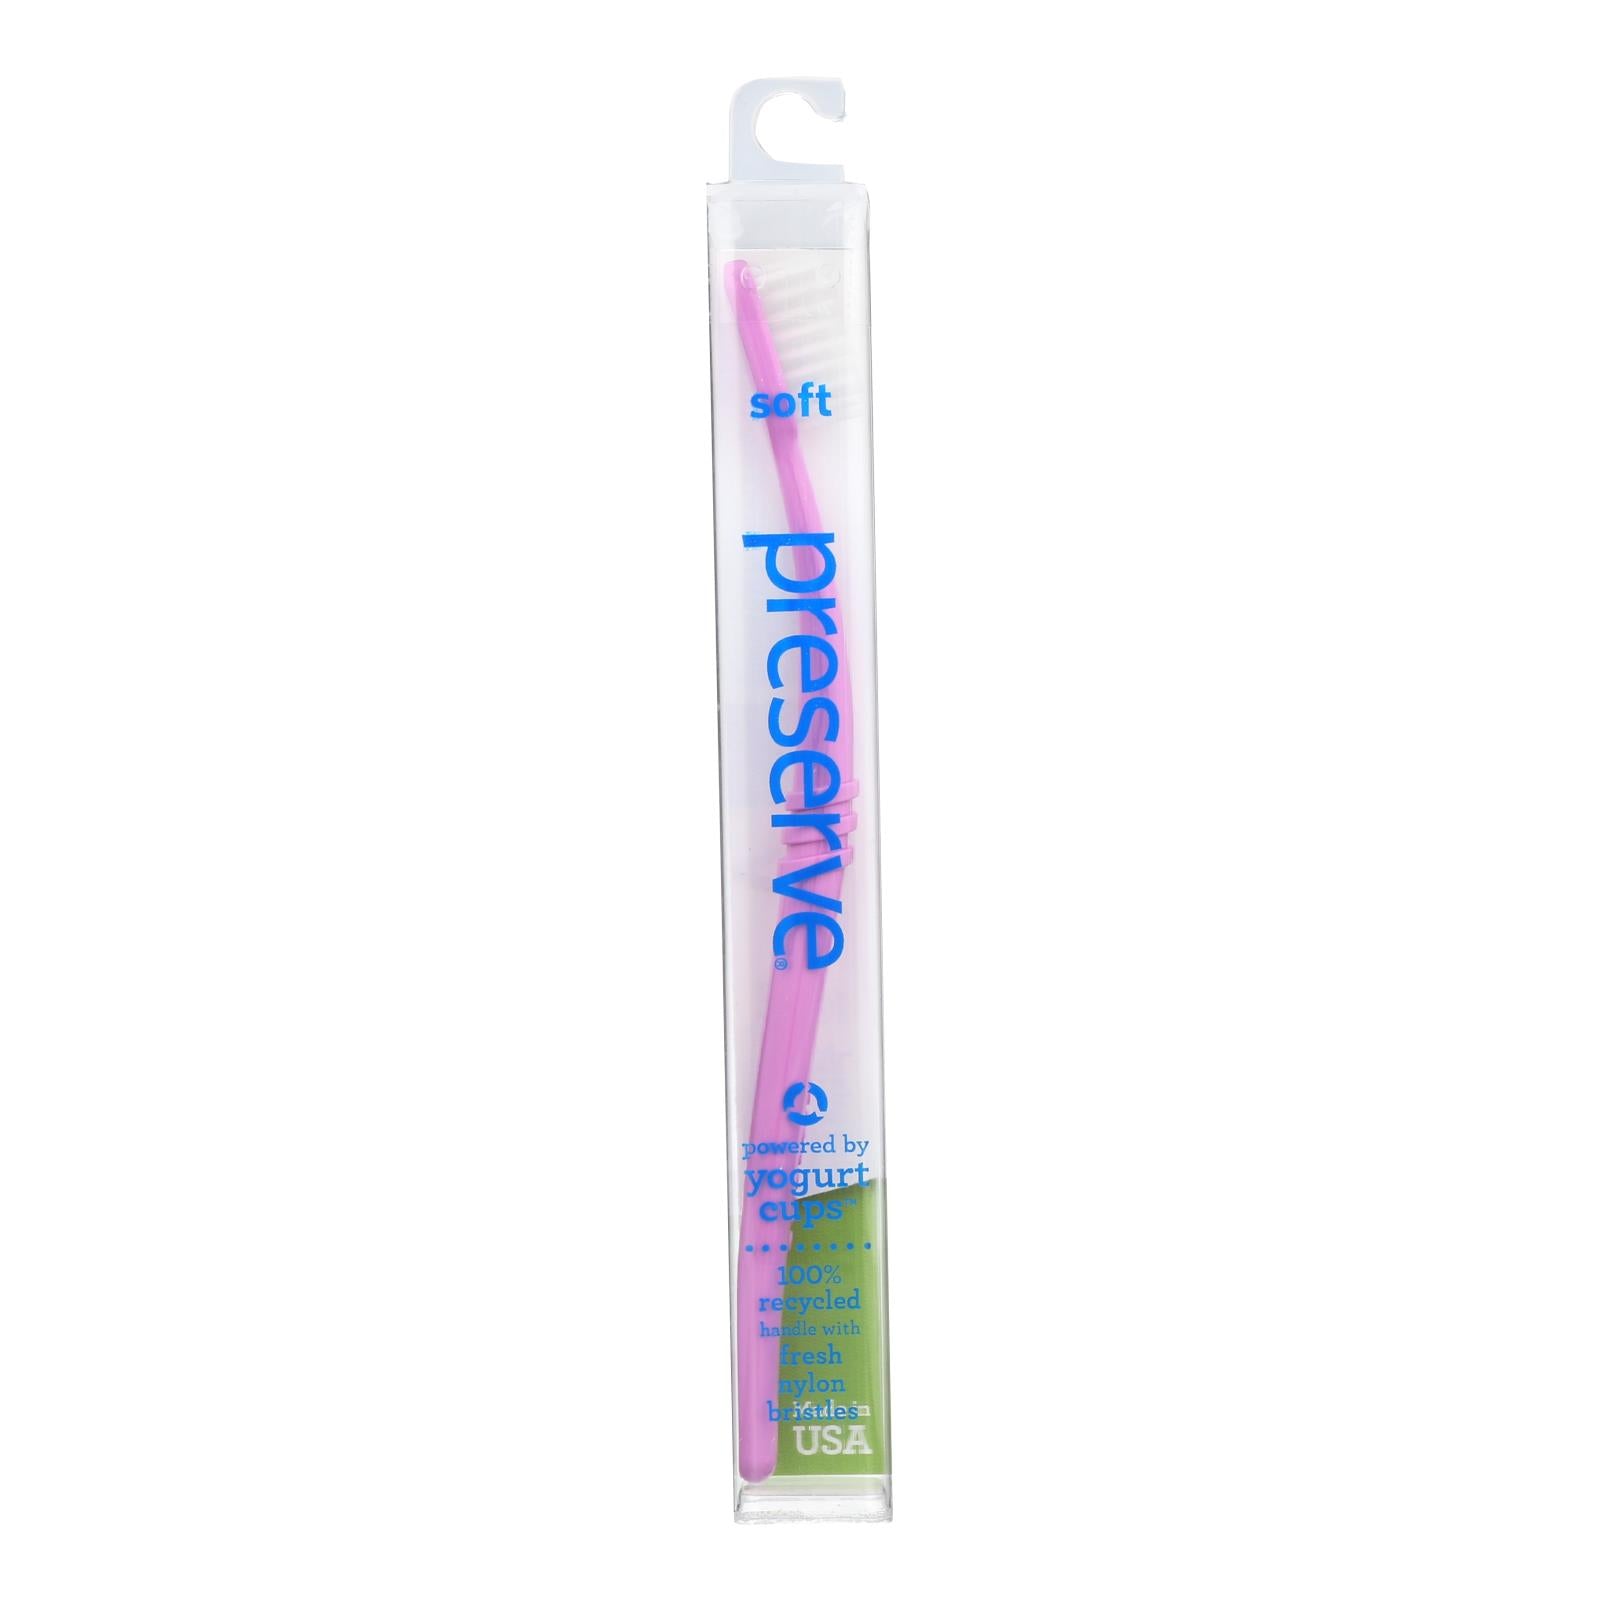 Preserve Toothbrush In A Travel Case Soft - 6 Pack - Assorted Colors